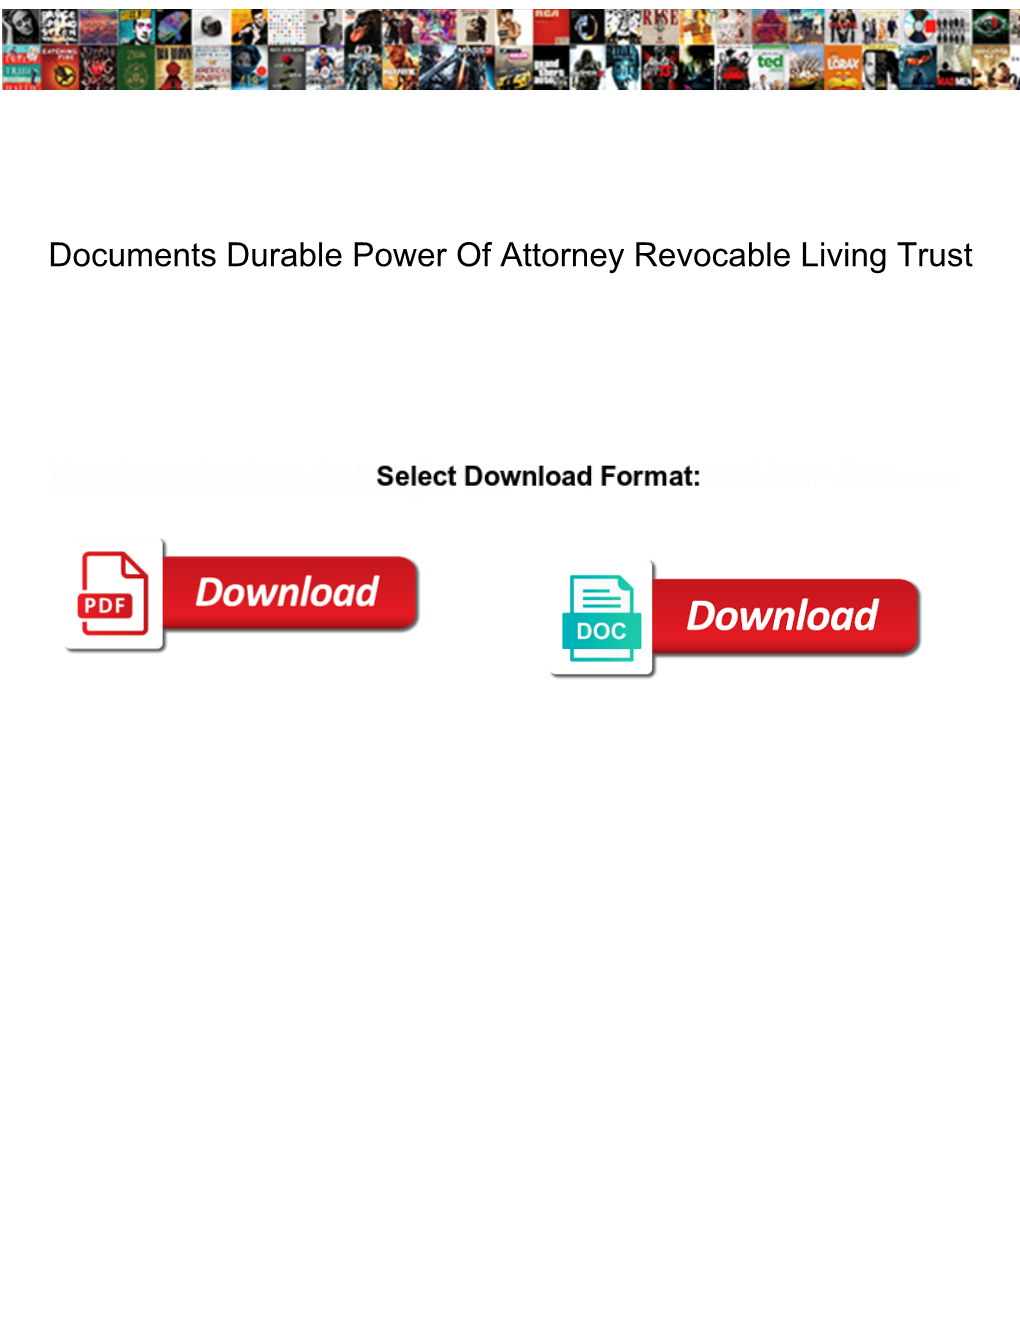 Documents Durable Power of Attorney Revocable Living Trust